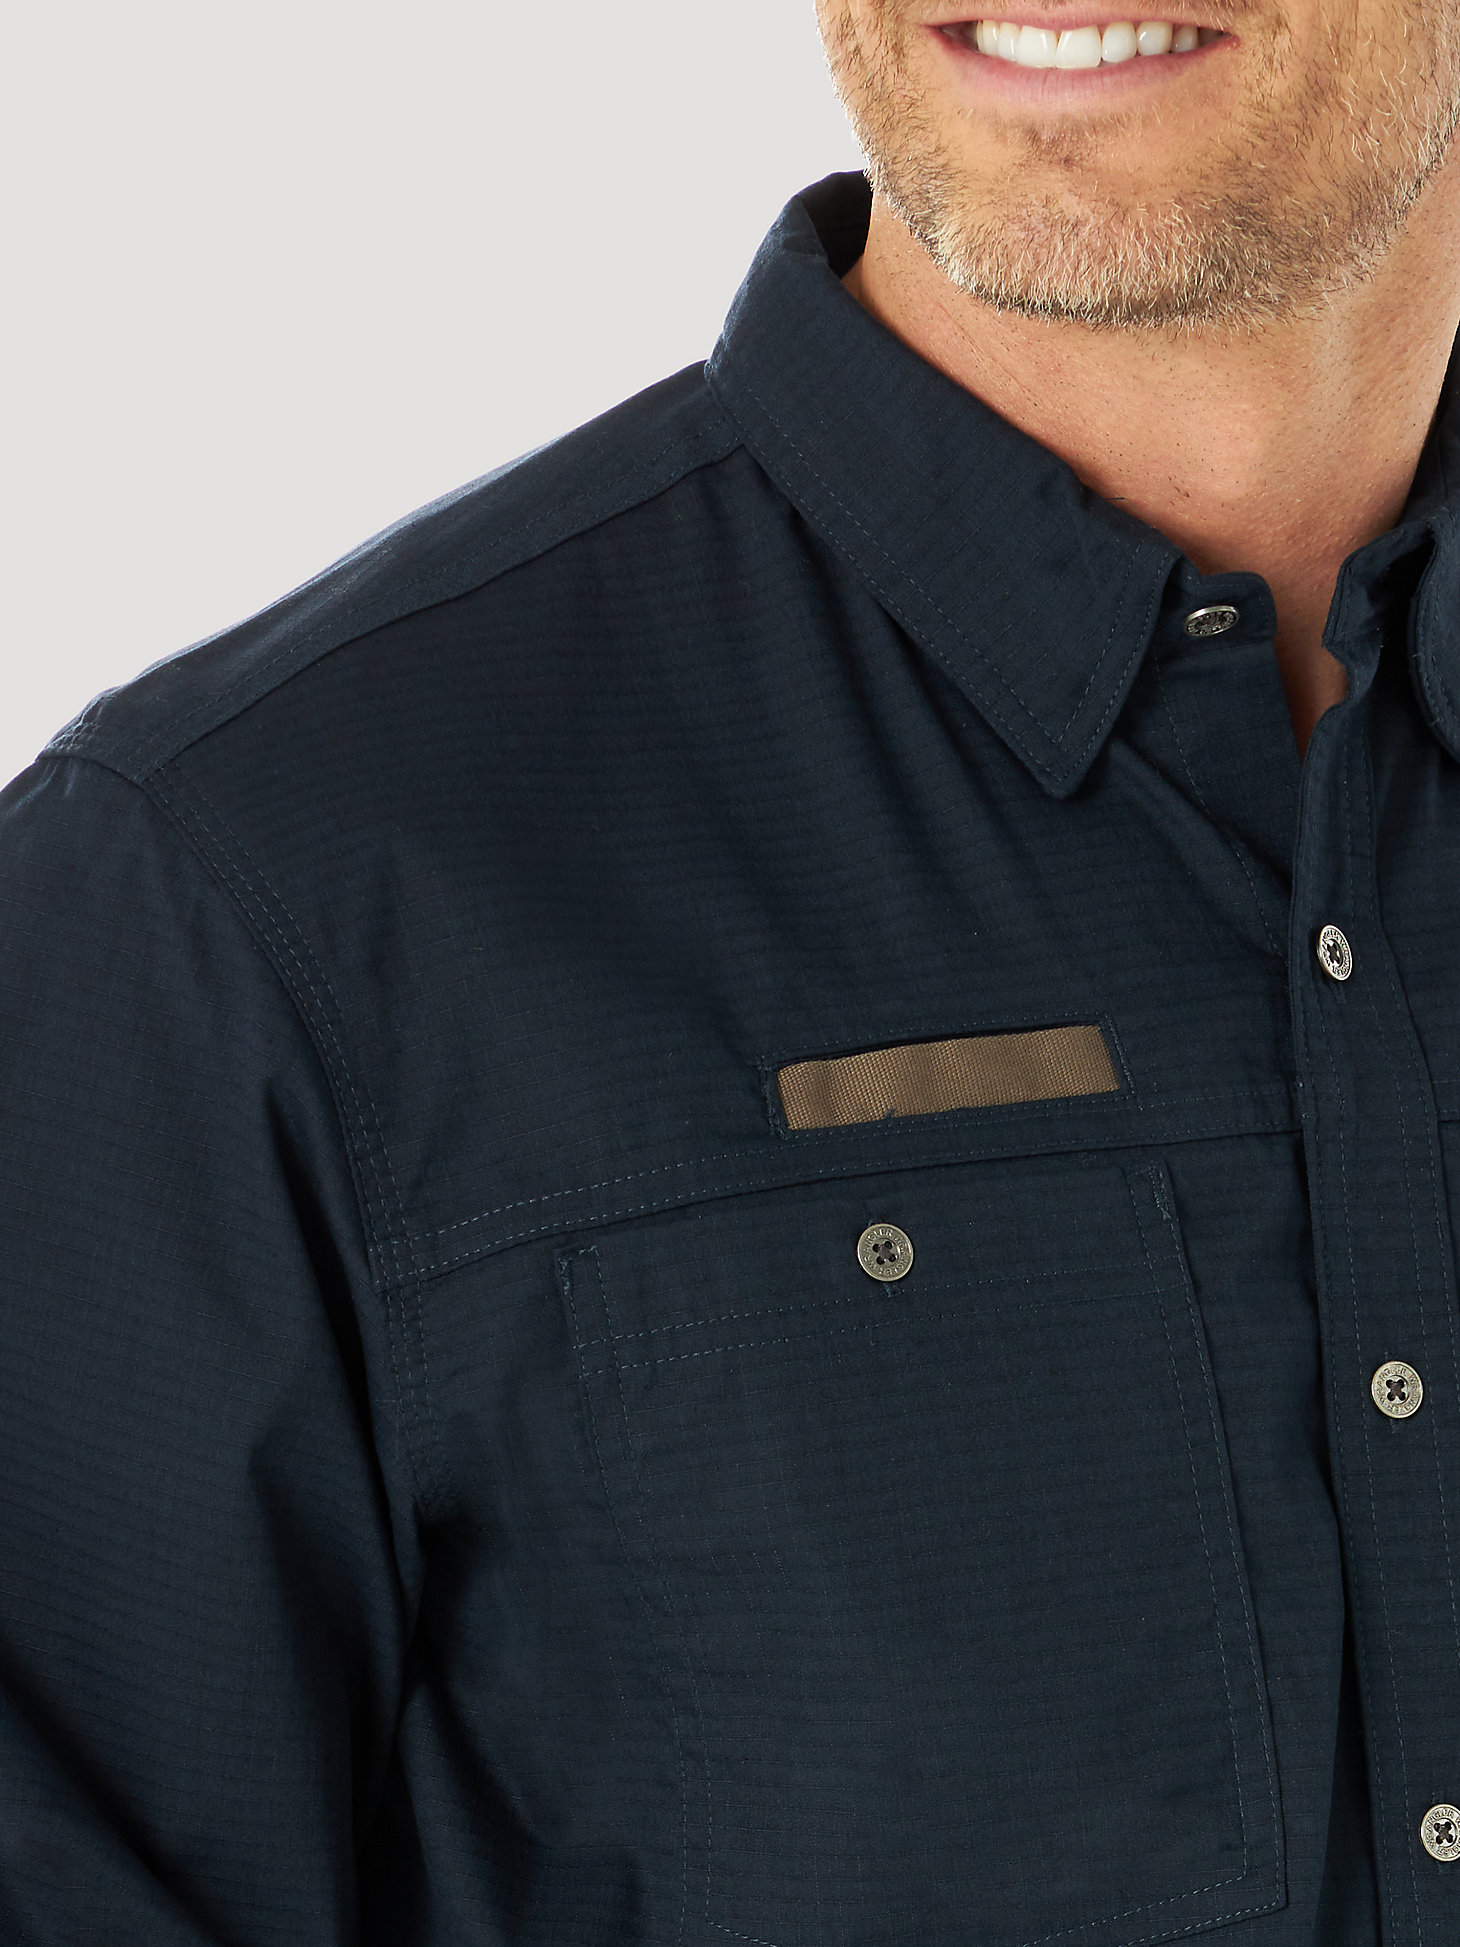 Wrangler® RIGGS Workwear® Long Sleeve Vented Solid Work Shirt in Navy alternative view 3